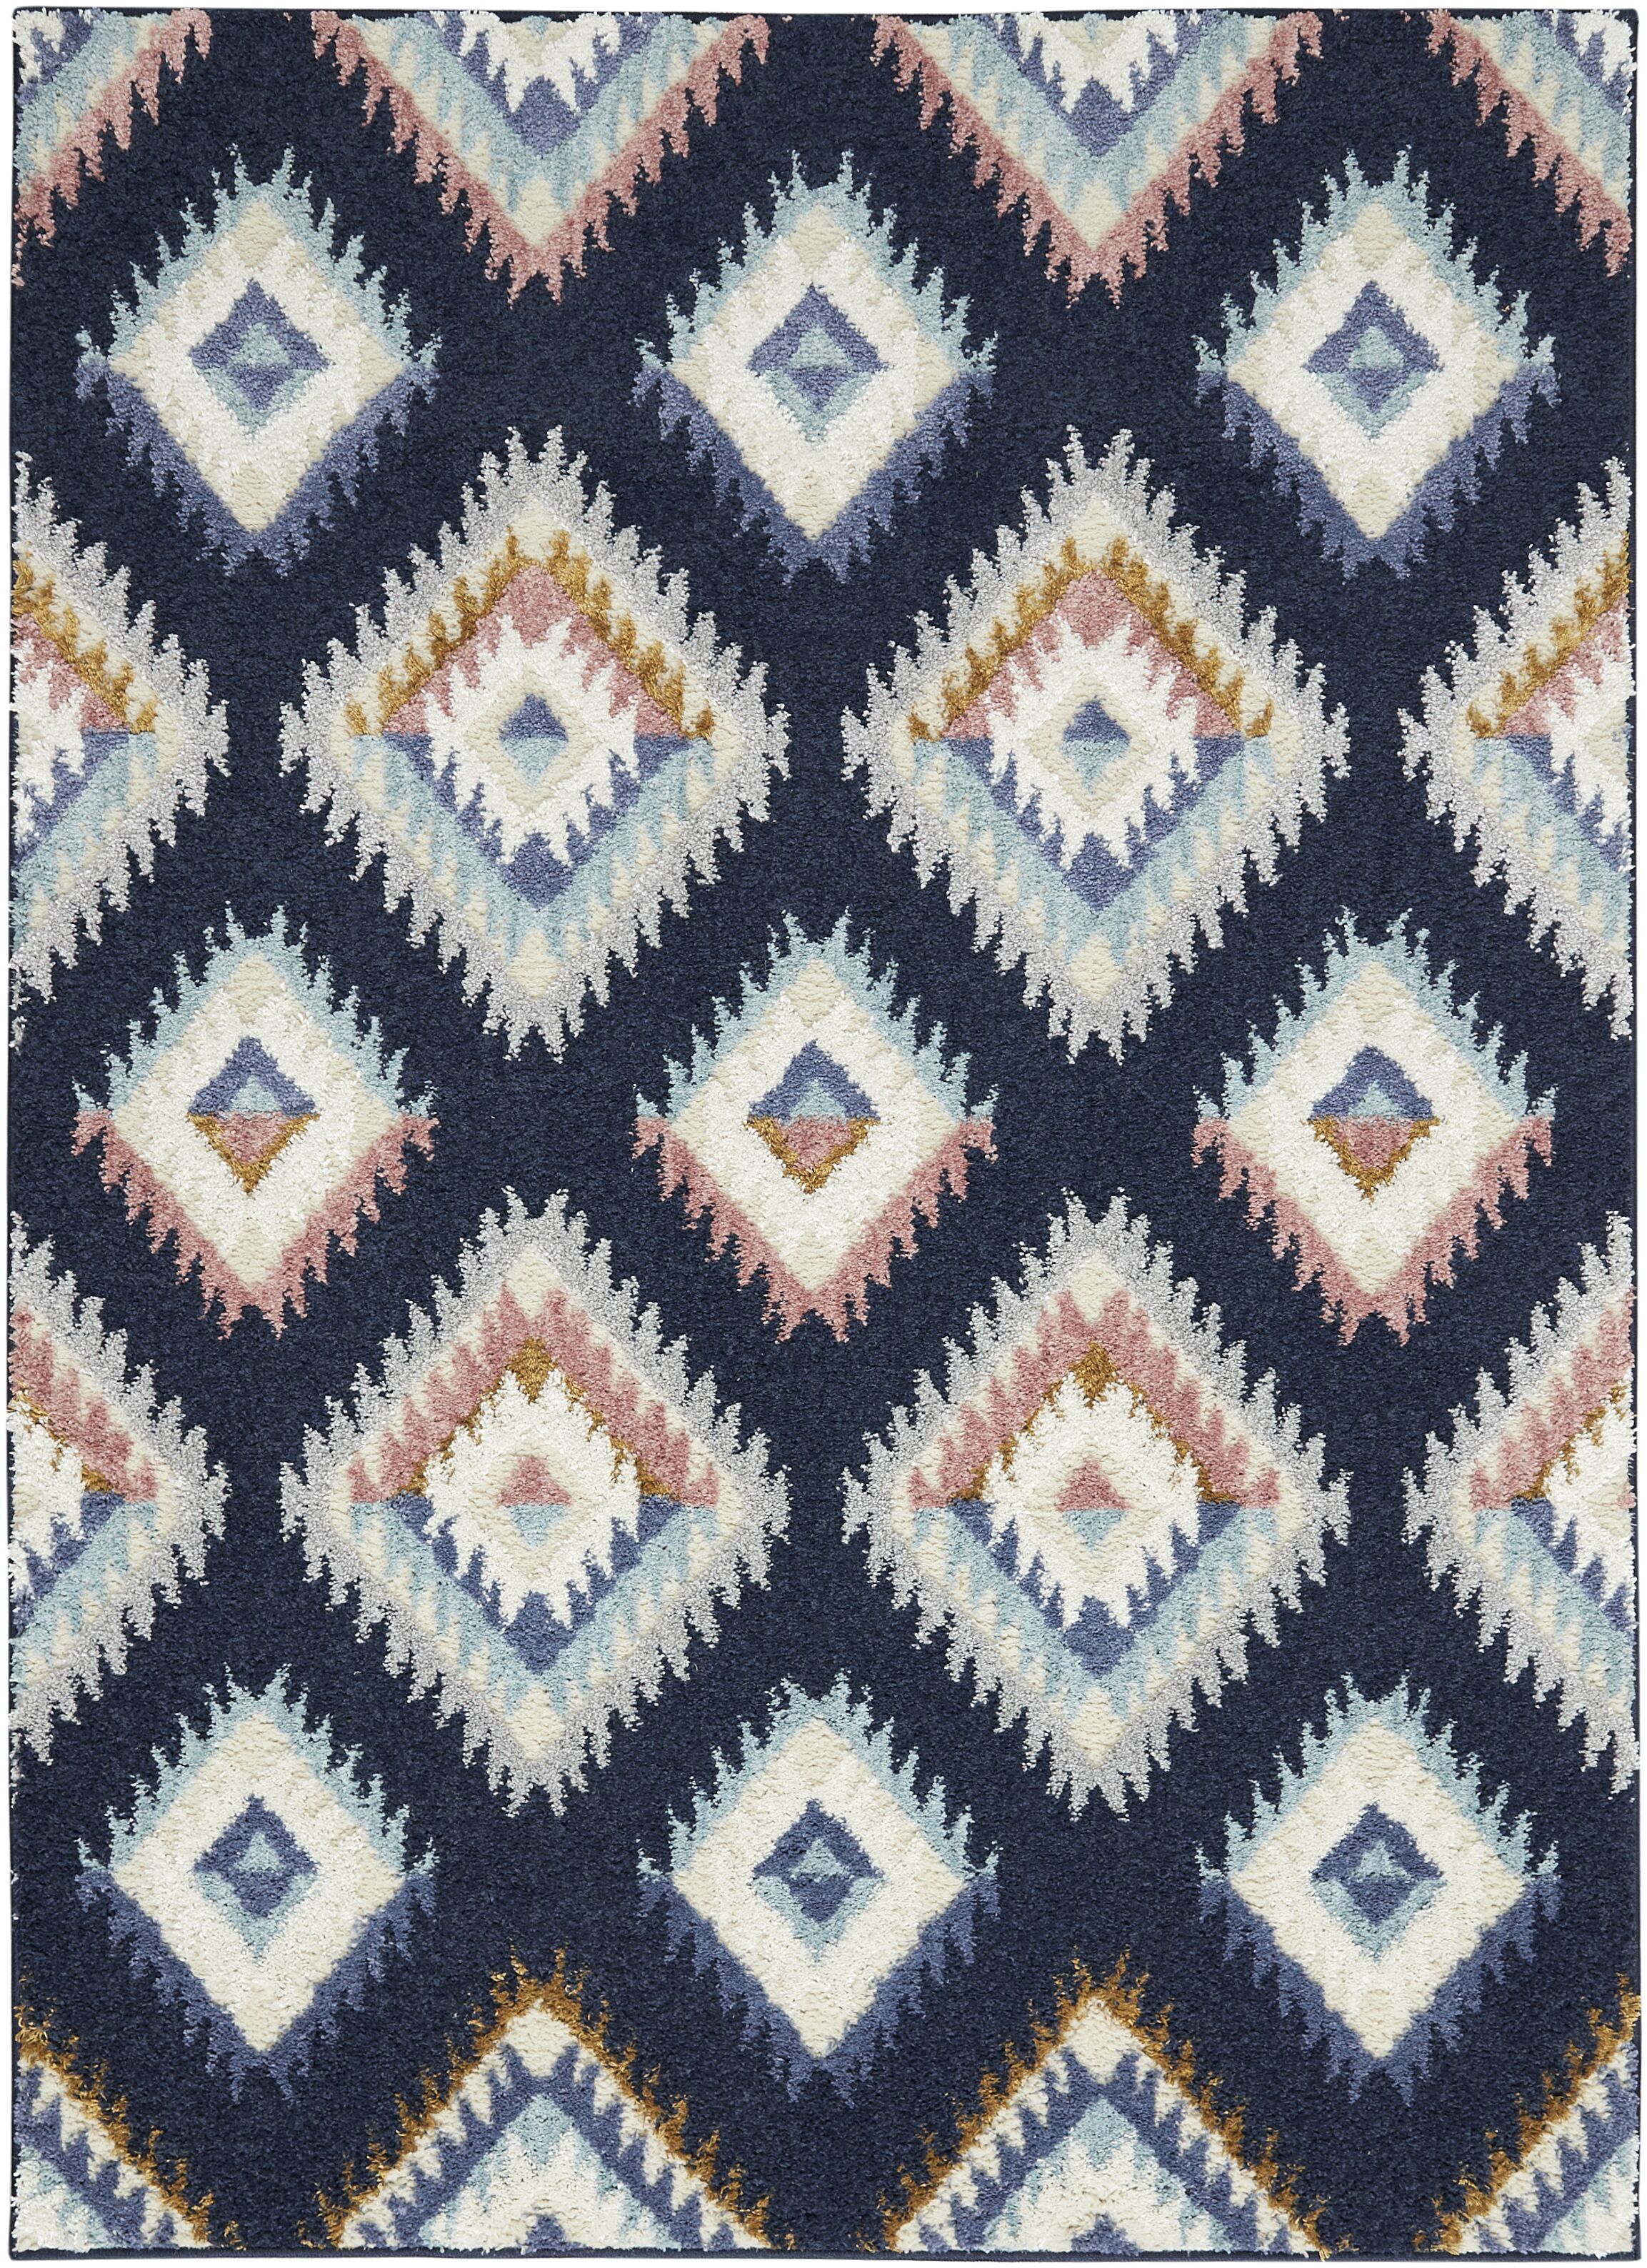 A patterned rug in blues and greys.